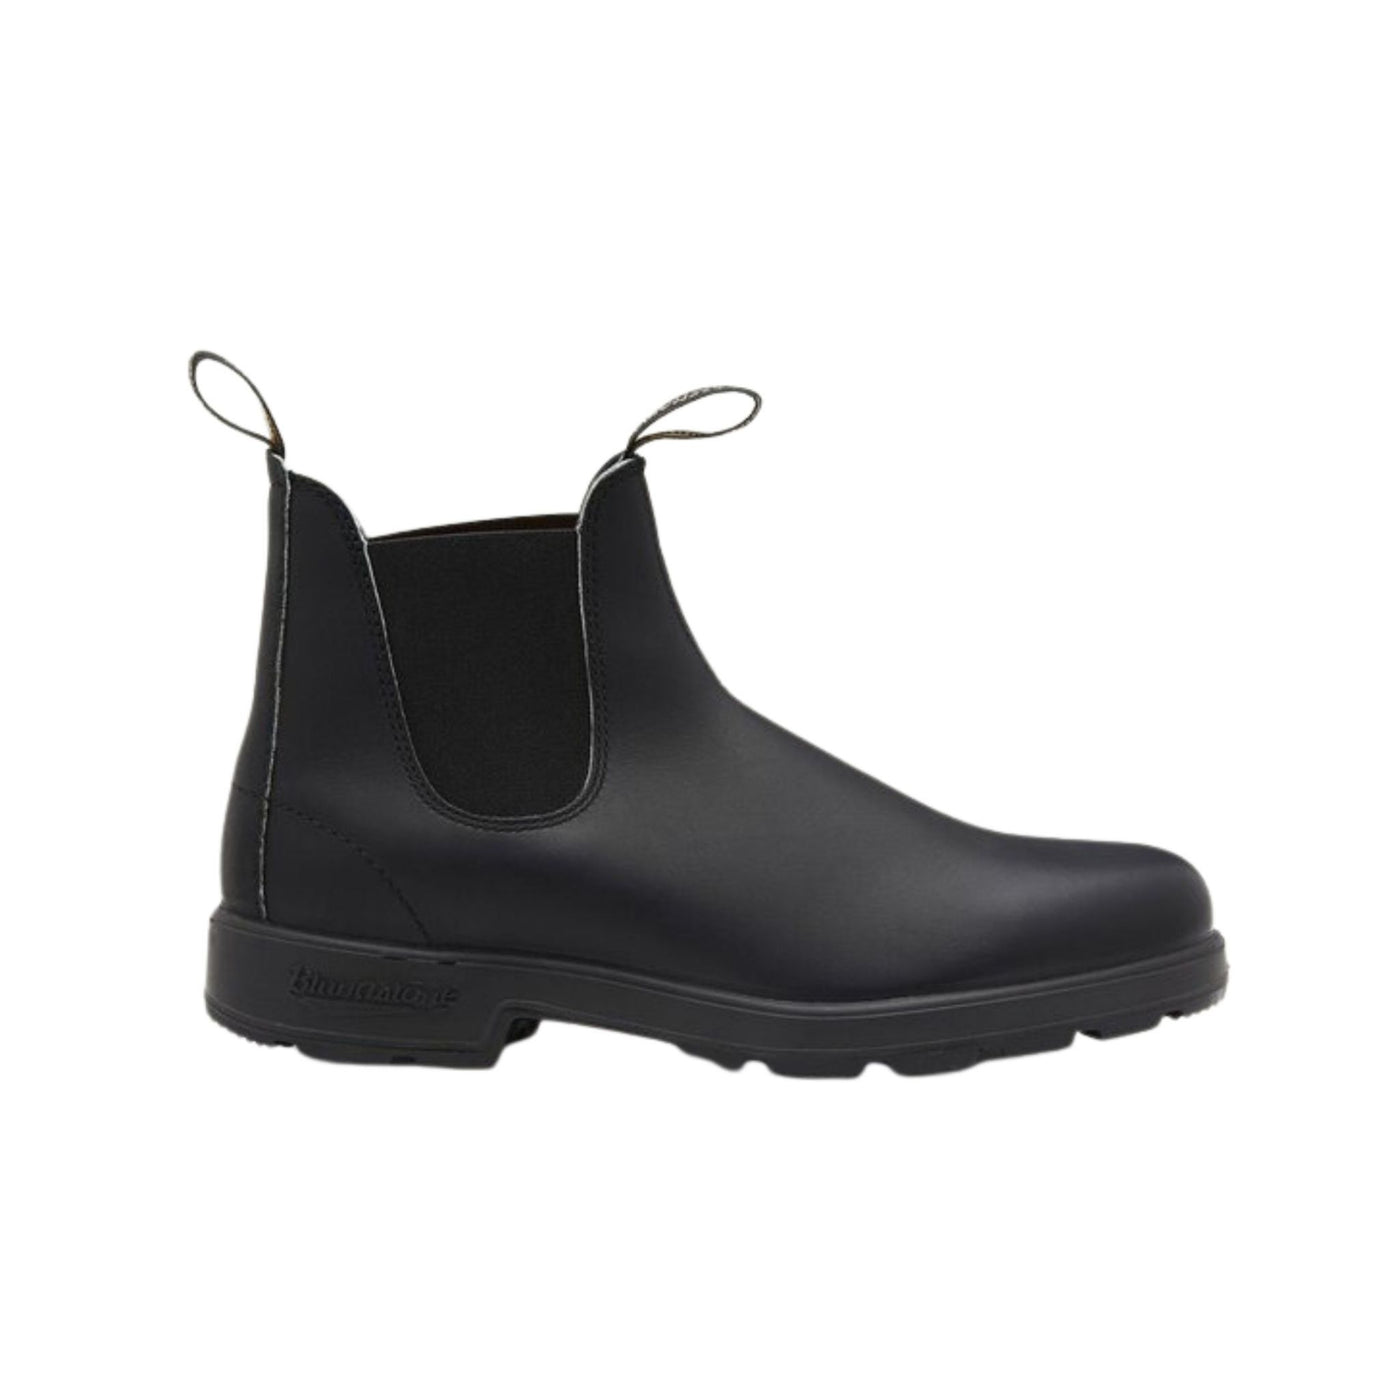 Black men's ankle boot in smooth leather